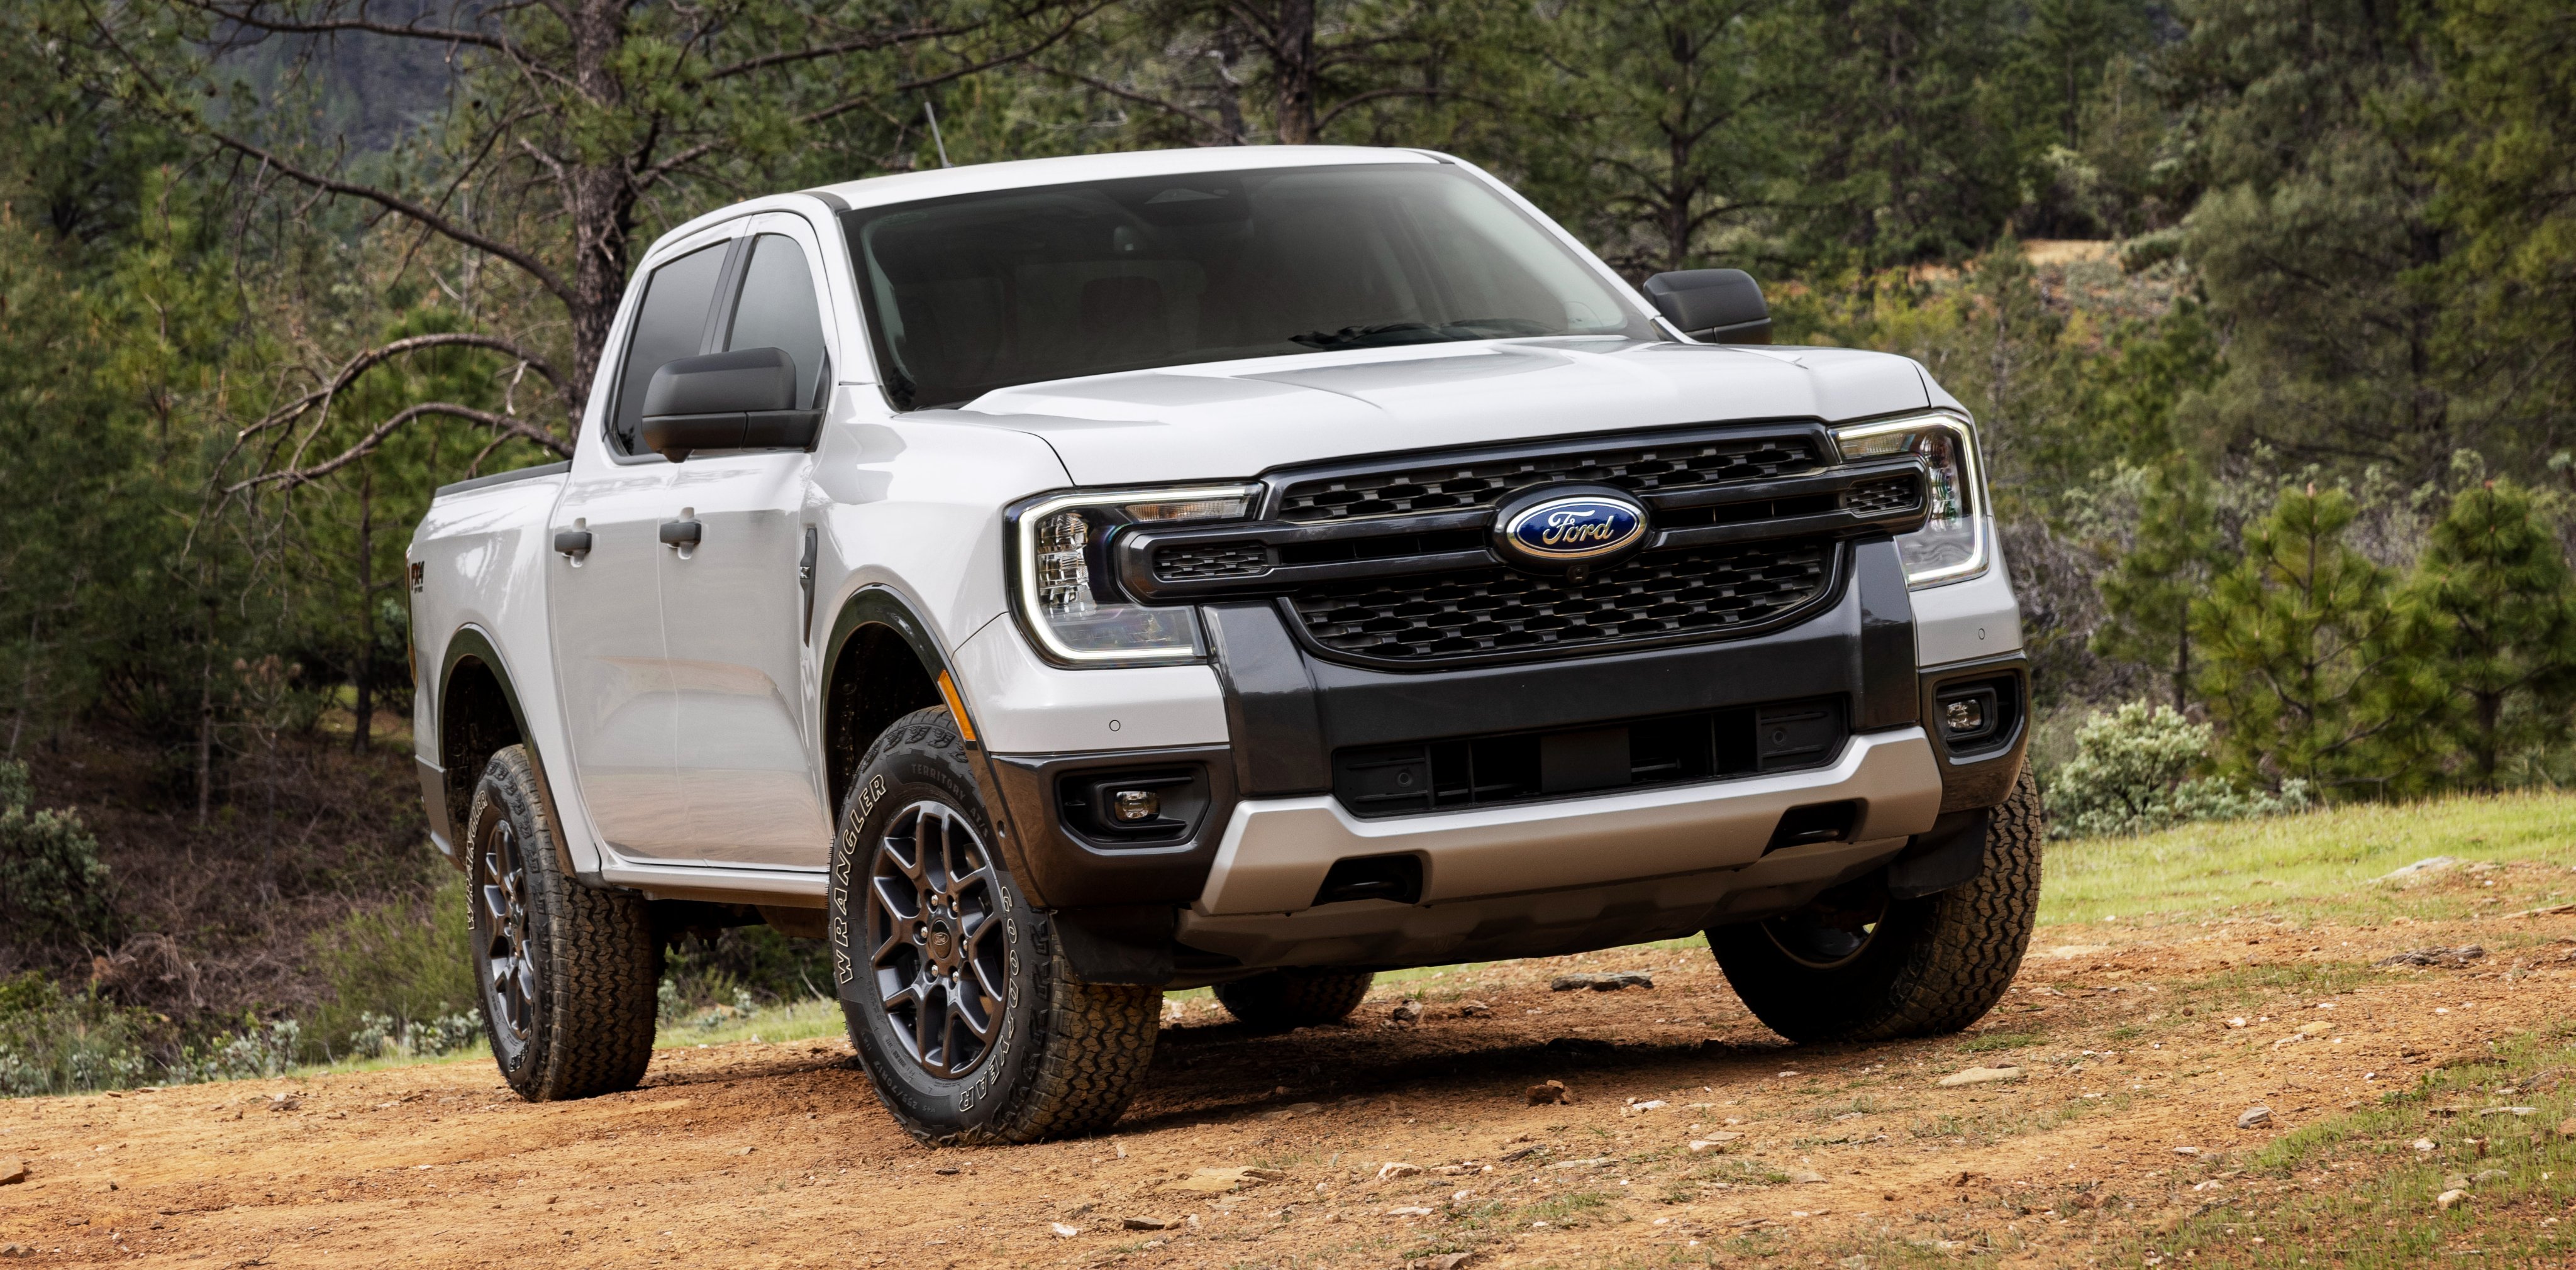 2024 Ford Ranger Configurator Is Live, Order Banks Open Soon [UPDATE]